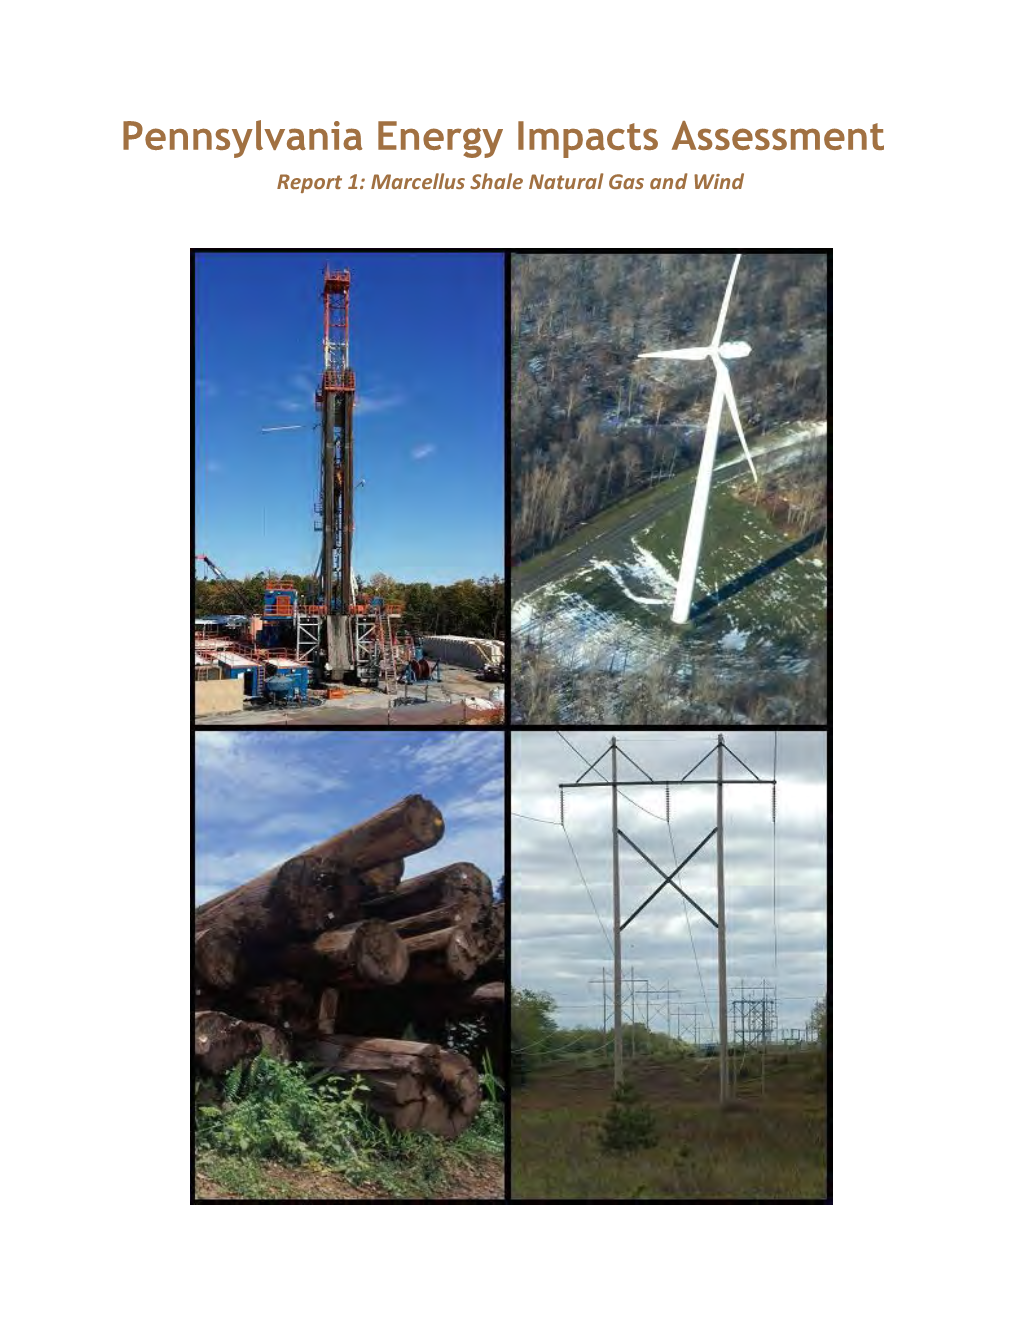 Pennsylvania Energy Impacts Assessment Report 1: Marcellus Shale Natural Gas and Wind